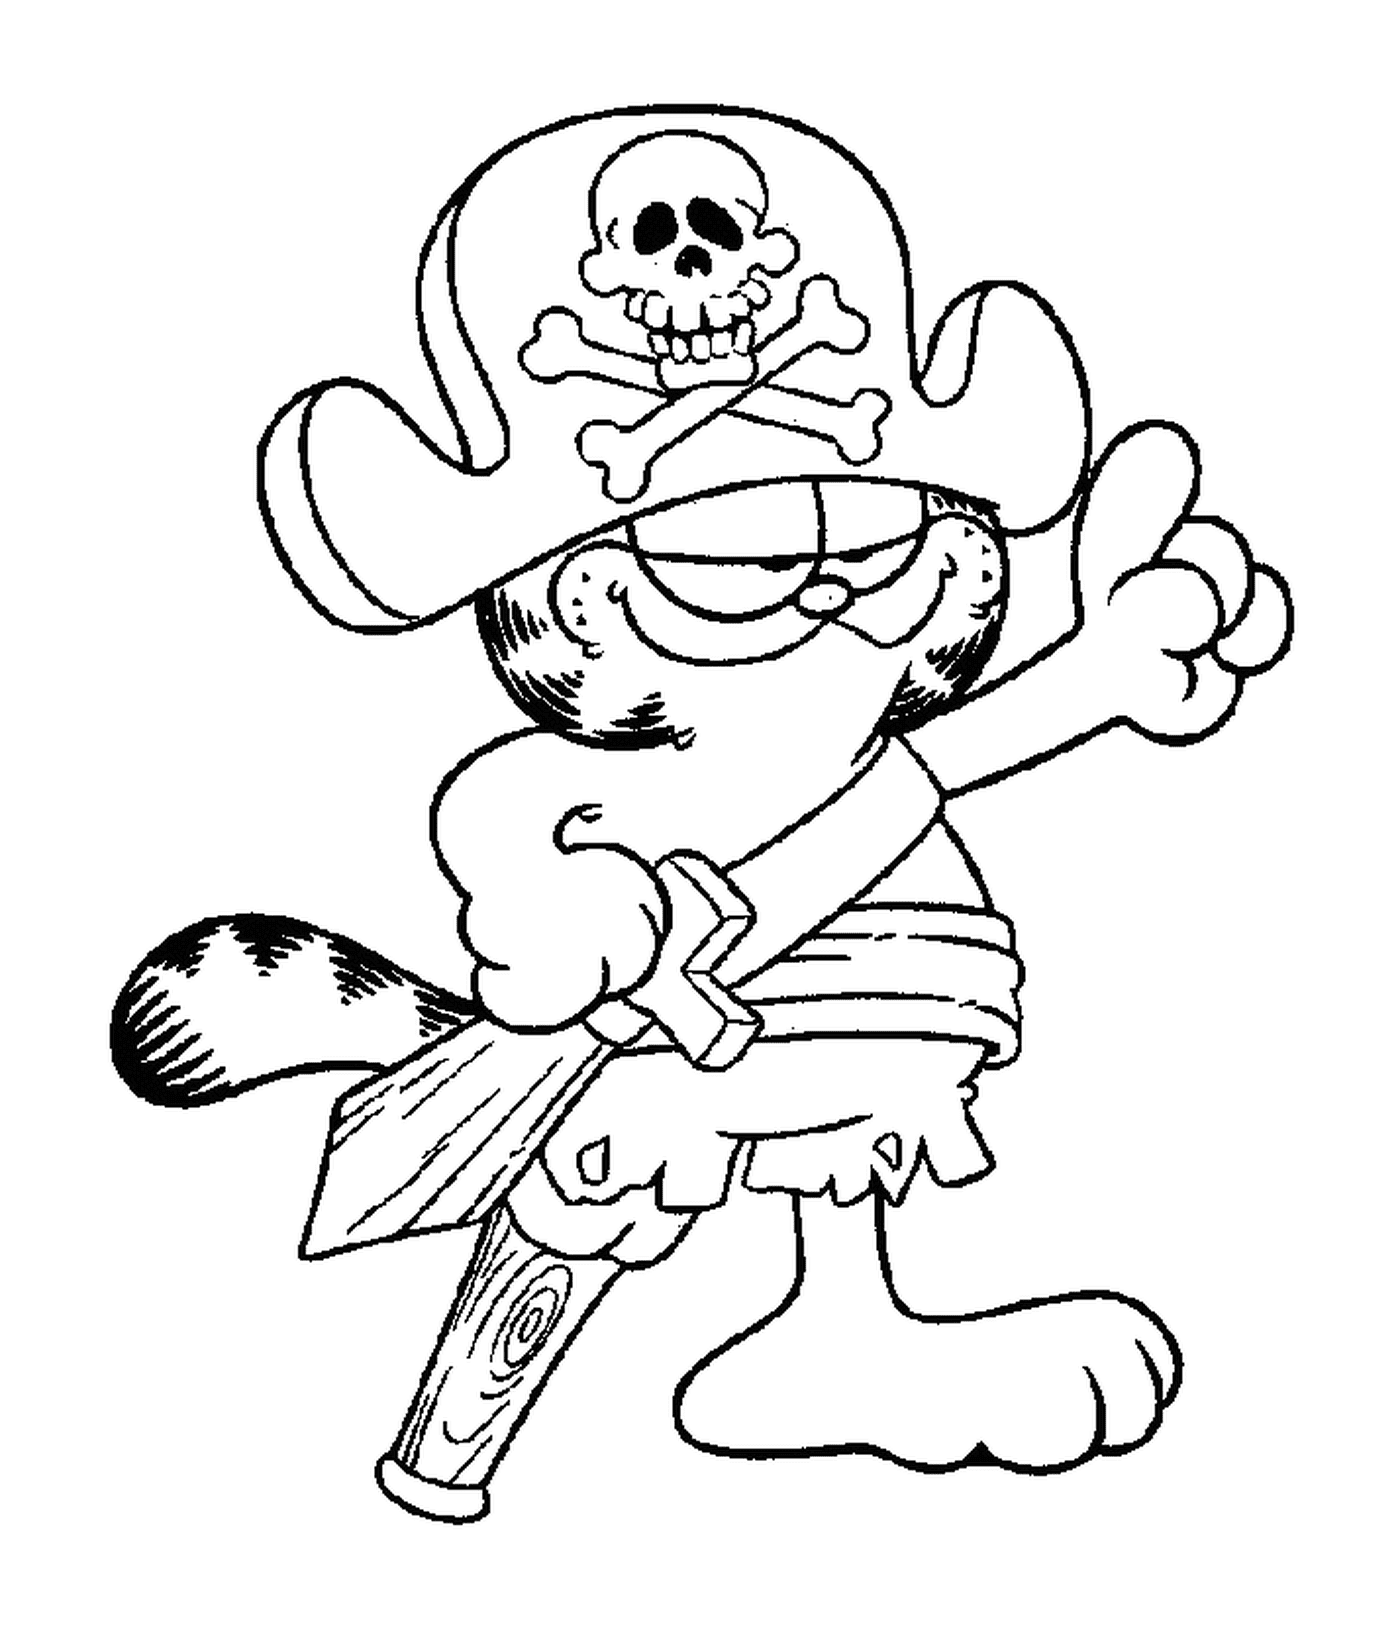  Garfield disguised as a pirate 